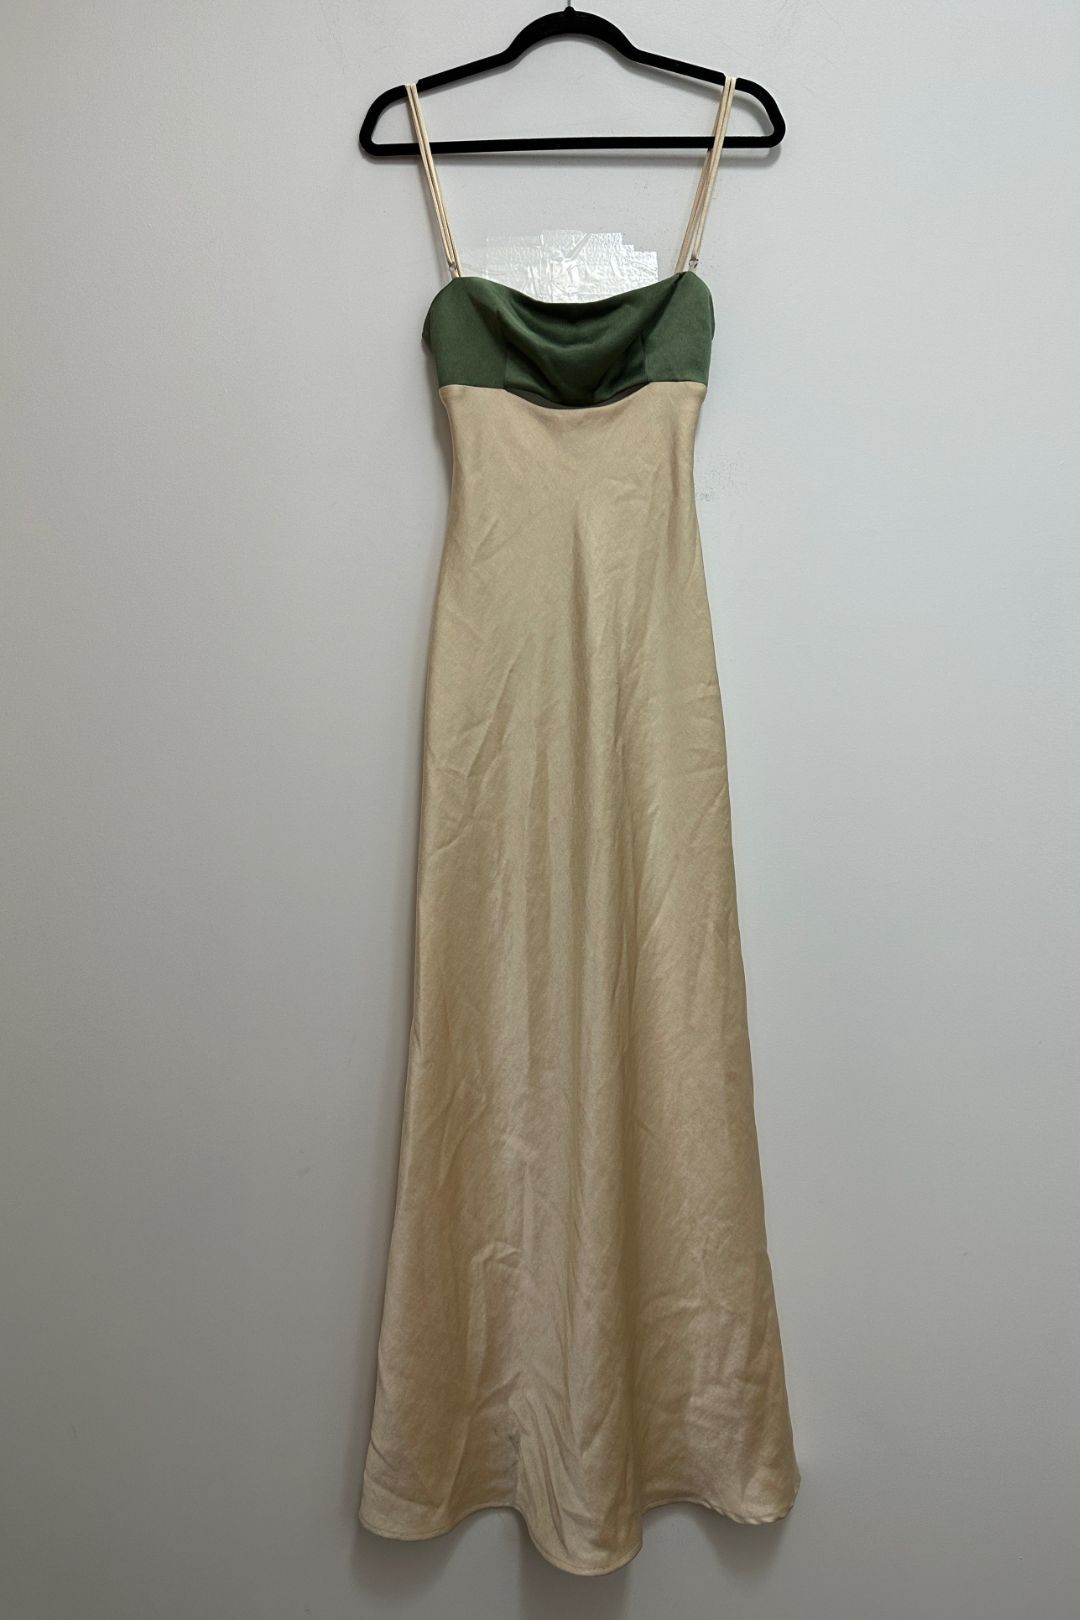 Bec and Bridge Carrie Maxi Dress in Cream and Green2